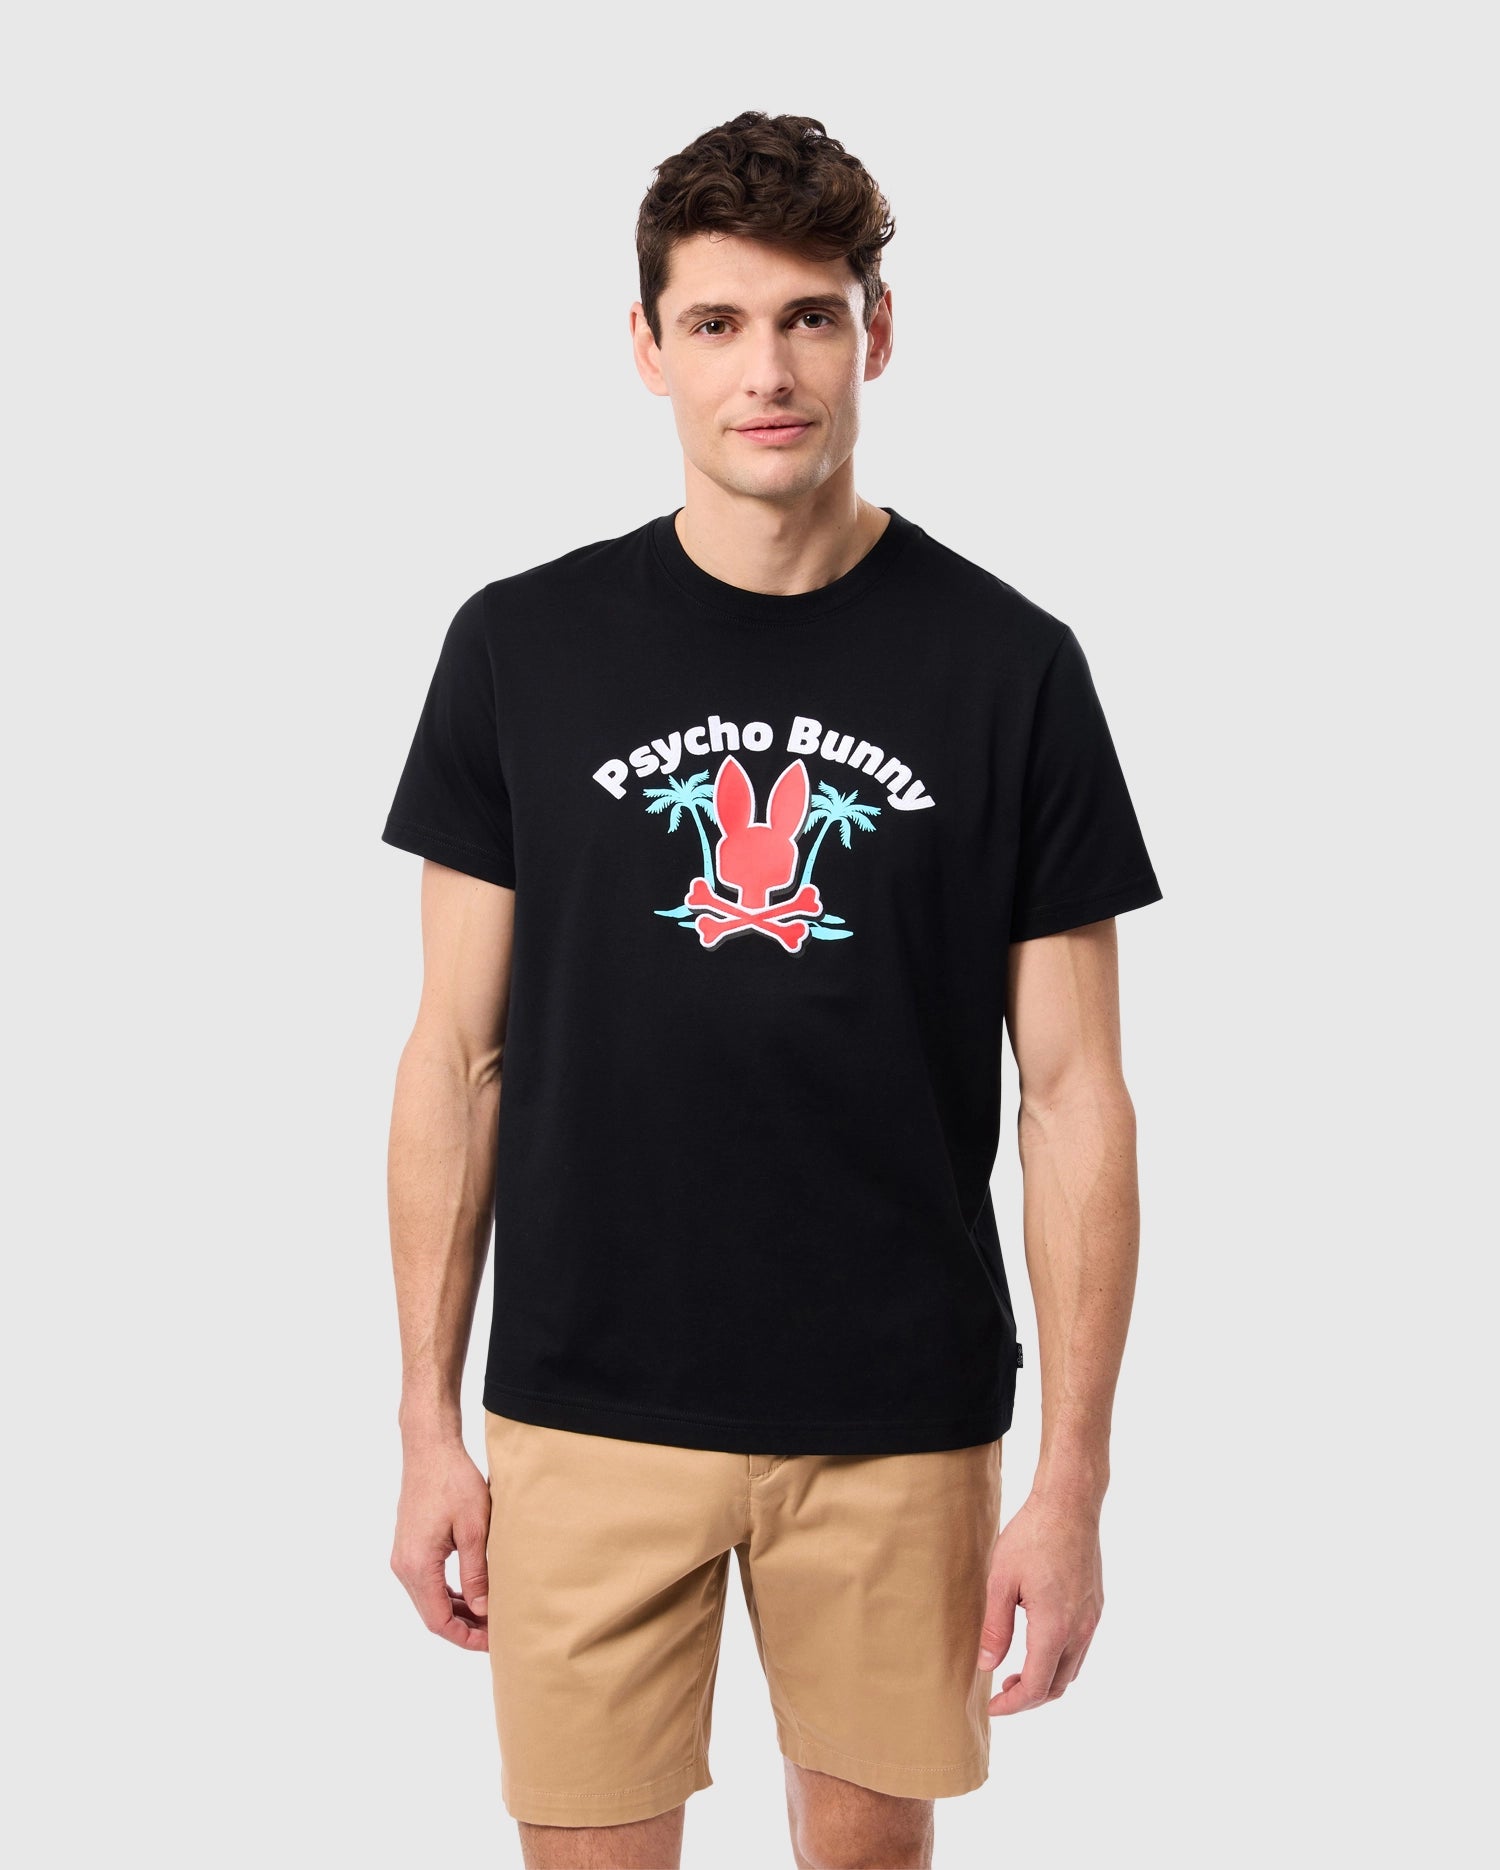 A person wearing a black MENS BOSTON GRAPHIC TEE - B6U573C200 made of soft Peruvian Pima cotton with a vibrant 